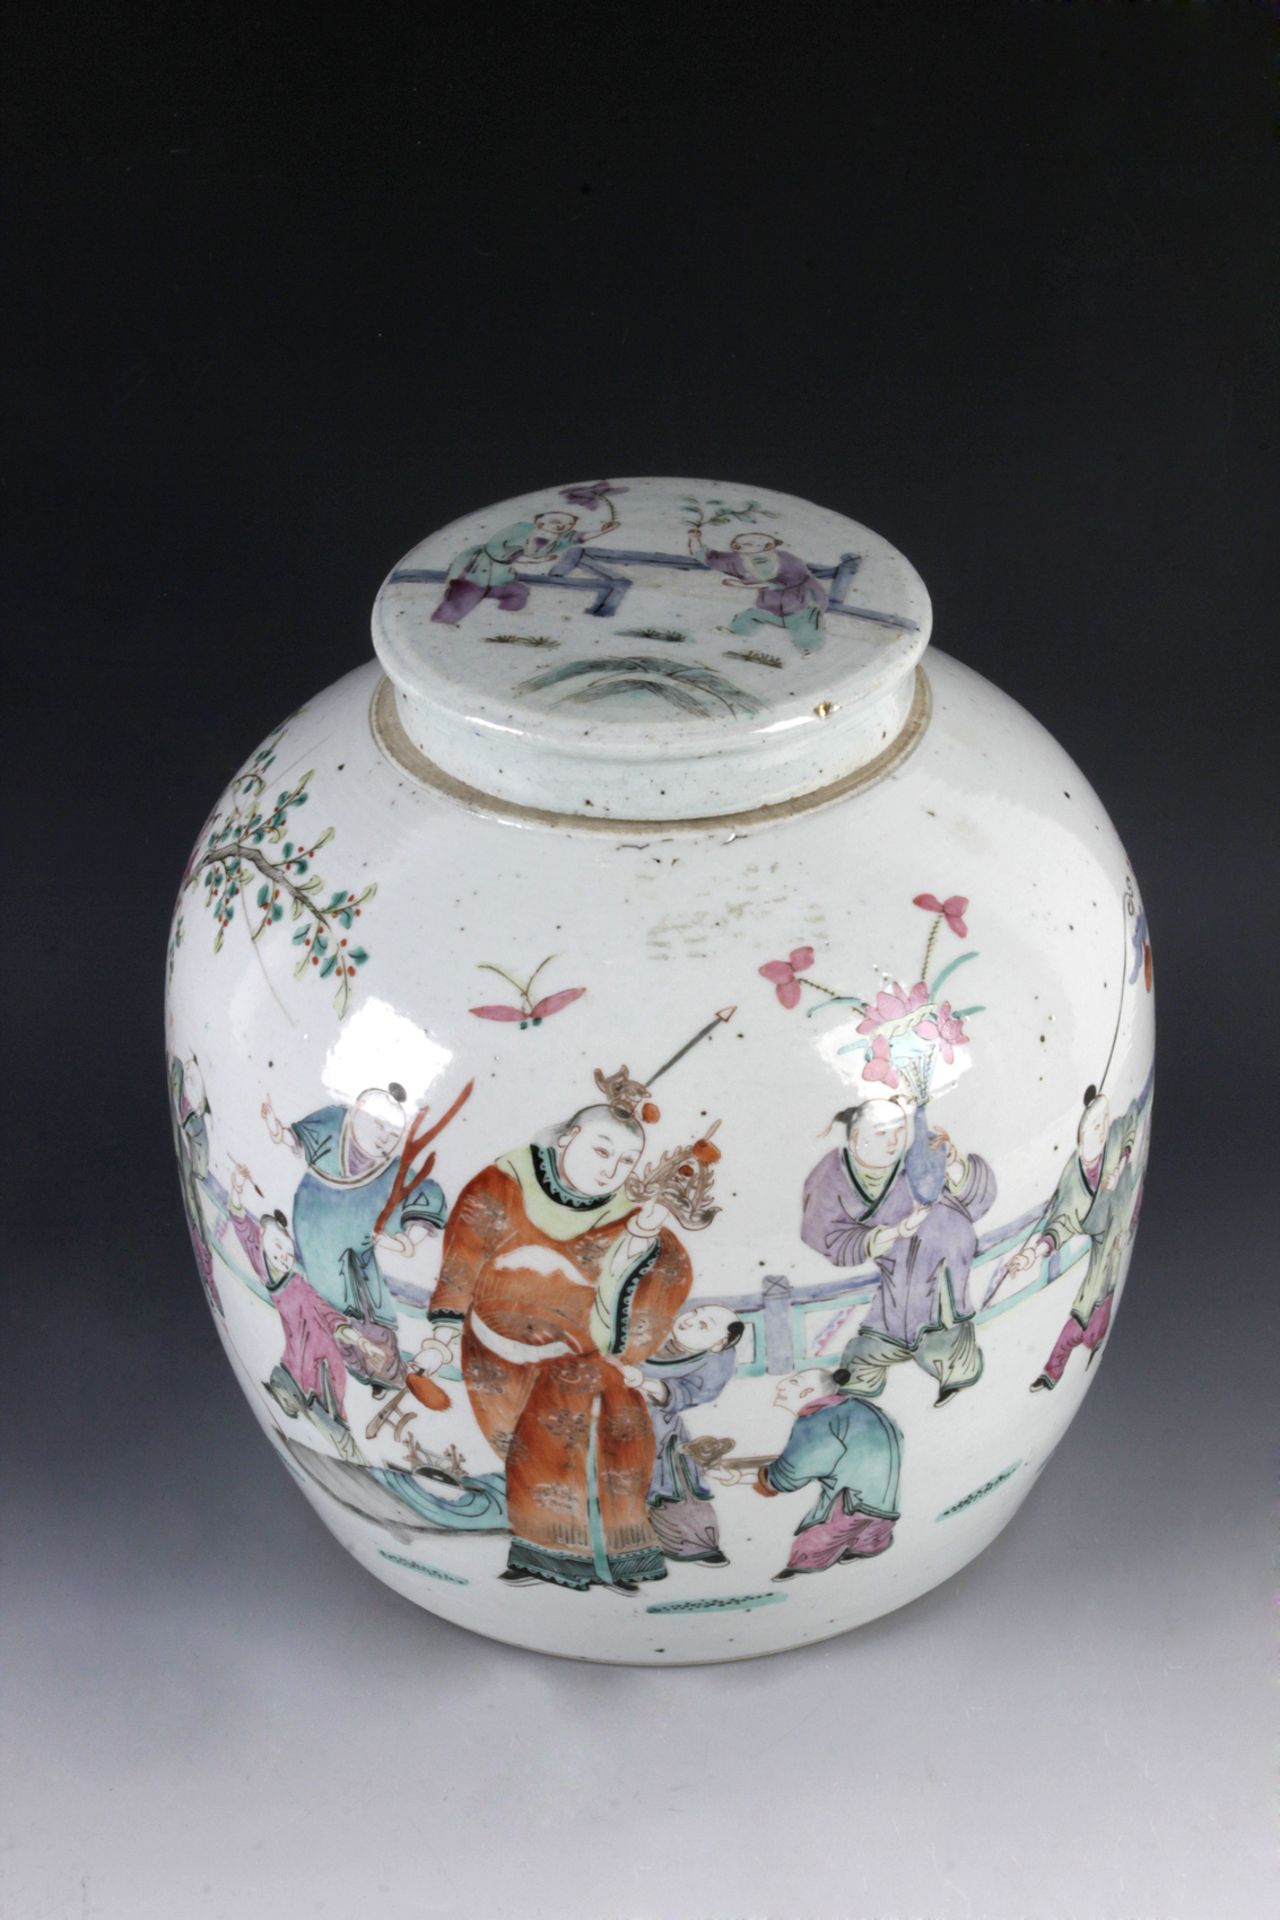 A 19th century Chinese Qing dynasty porcelain ginger jar